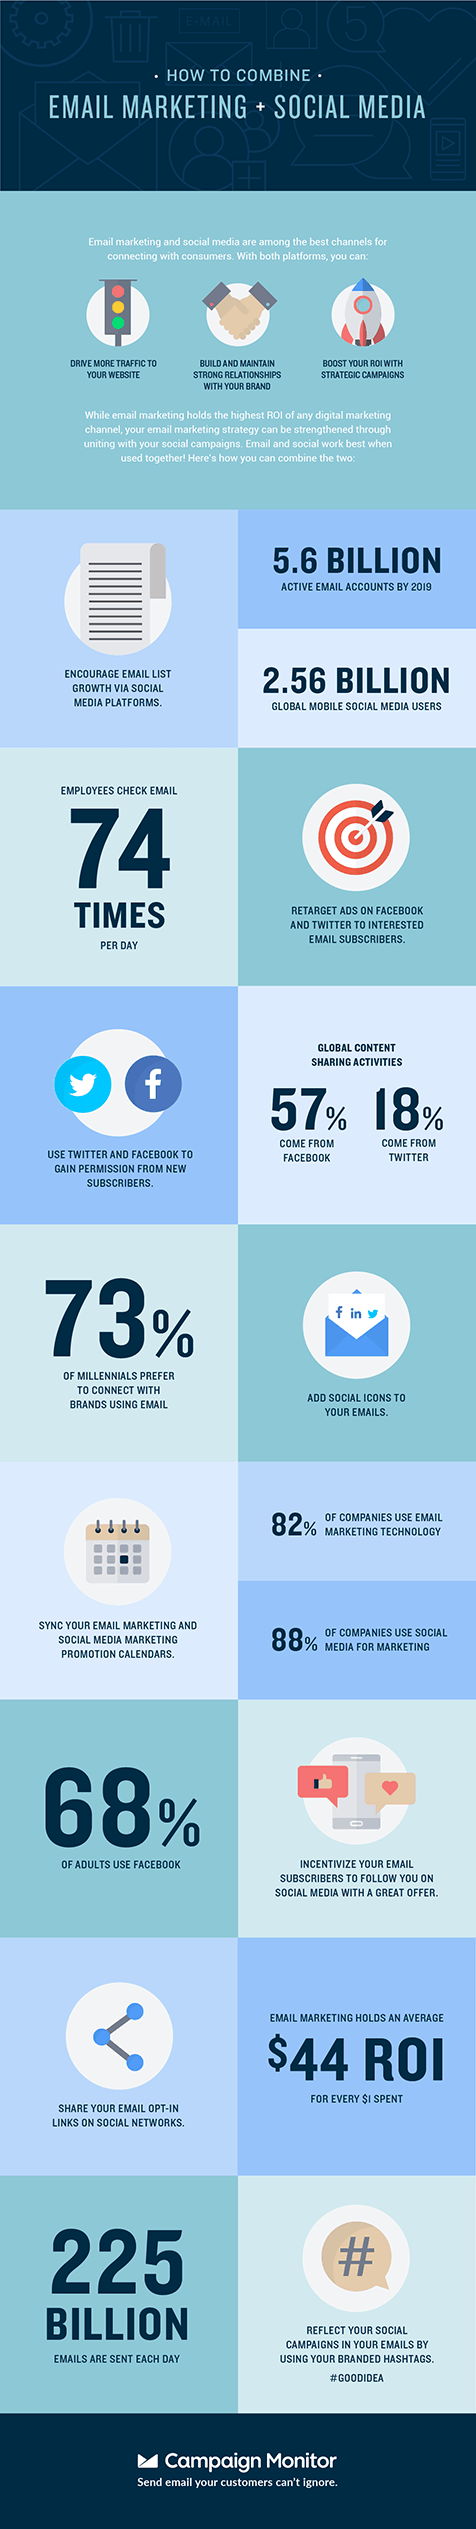 An Infographic on How You Can Combine Email Marketing & Social Media